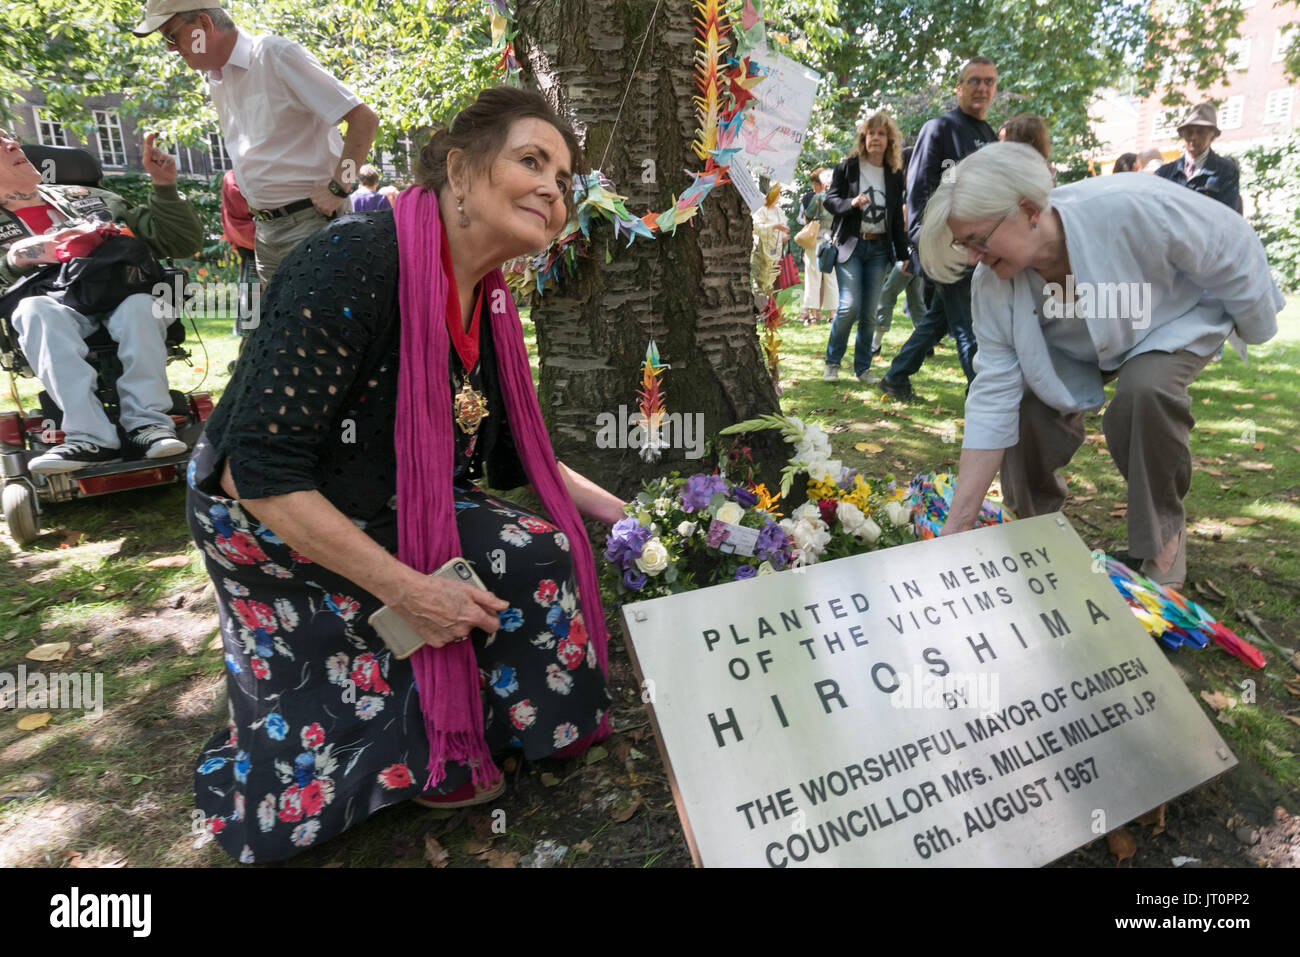 London, UK. 6th Aug, 2017. London, UK. 6th August 2017. Cllr Jenny Headlam-Wells, Camden Deputy Mayor lays her wreath again for photographers at the Hiroshima Cherry Tree at the London CND ceremony in memory of the victims, past and present on the 72nd anniversary of the dropping of the atomic bomb on Hiroshima and the second atomic bomb dropped on Nagasaki three days later. Peter Marshall ImagesLive Credit: Peter Marshall/ImagesLive/ZUMA Wire/Alamy Live News Stock Photo